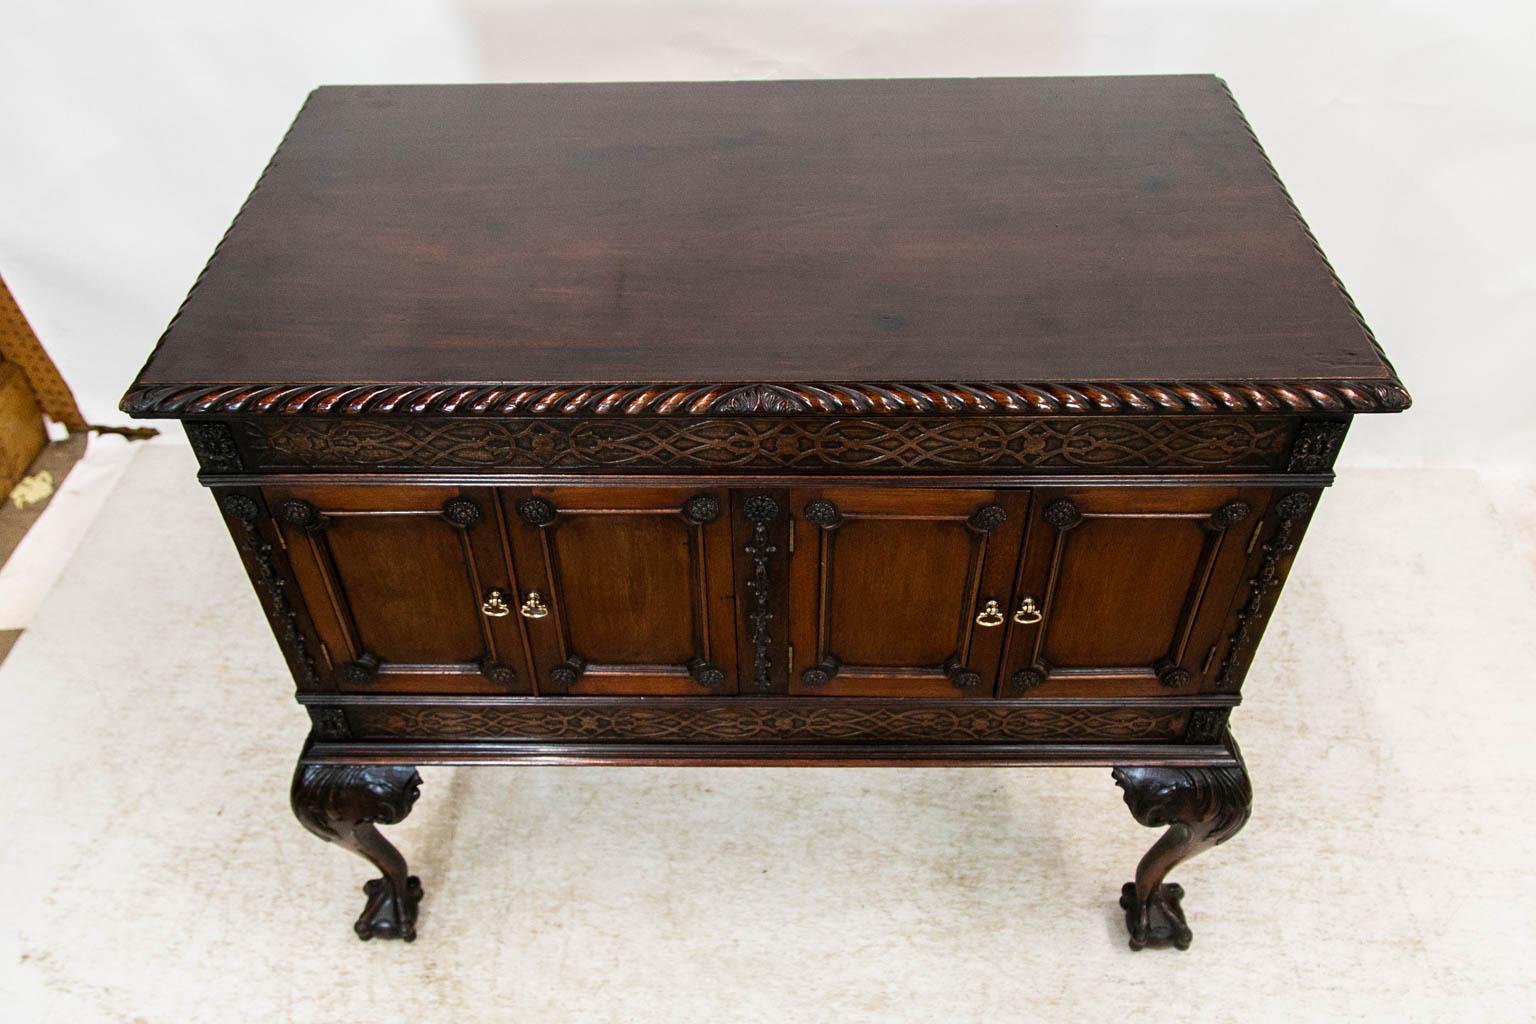 The top of this serving cabinet has a carved gadrooned molding. The frieze has blind fretwork. The right hand double doors are both functioning doors whereas the left hand is actually one single door. The blind fretwork in the upper frieze is